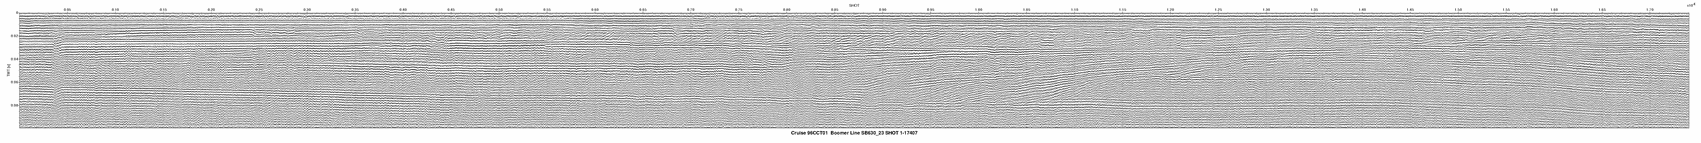 SB630_23 seismic profile thumbnail image with link to full size image